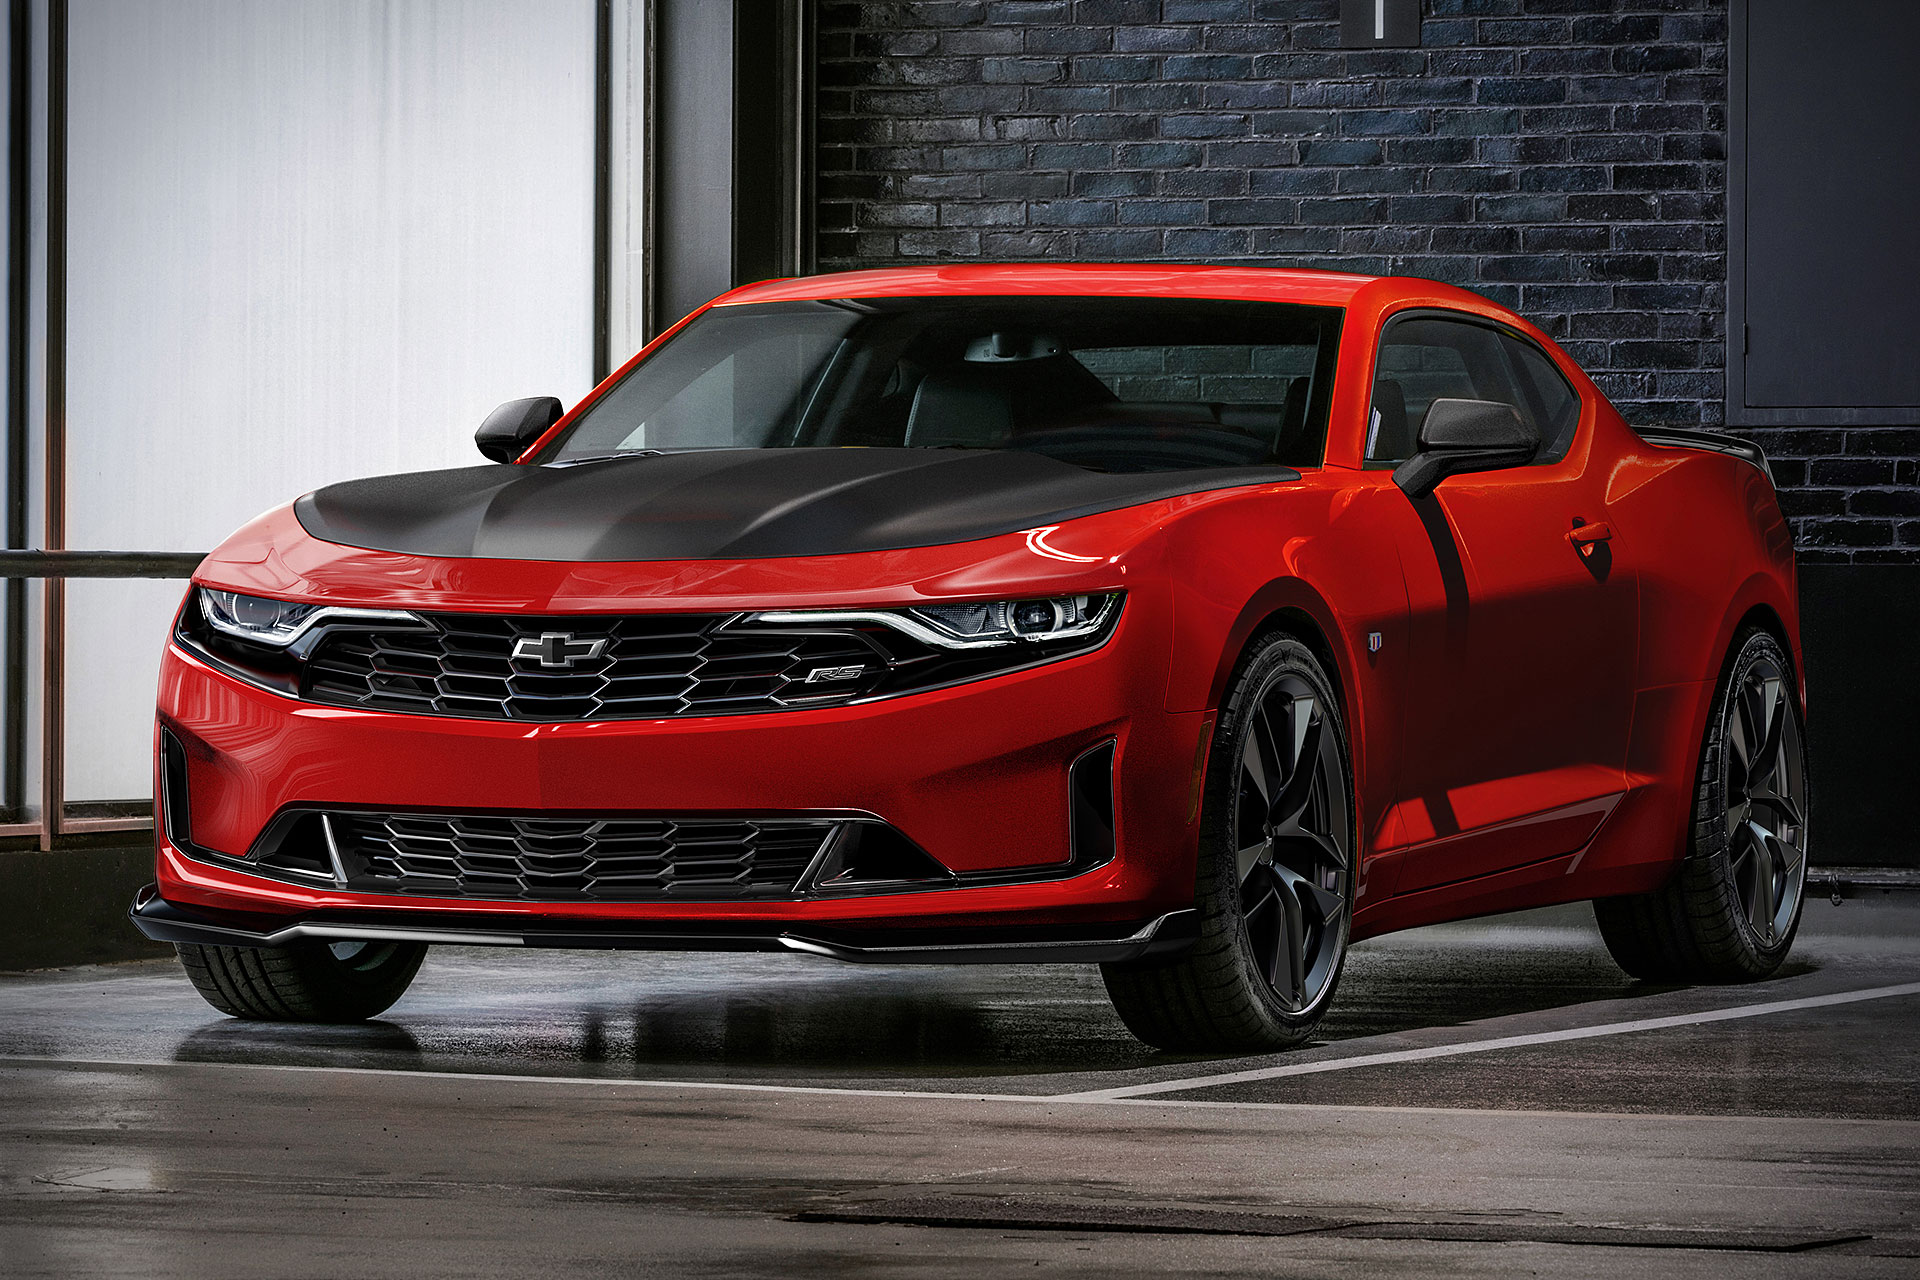 55 HQ Pictures Chevy Sports Cars List - Chevrolet Camaro - black Tenerife Sports Cars Camaro Rent ...